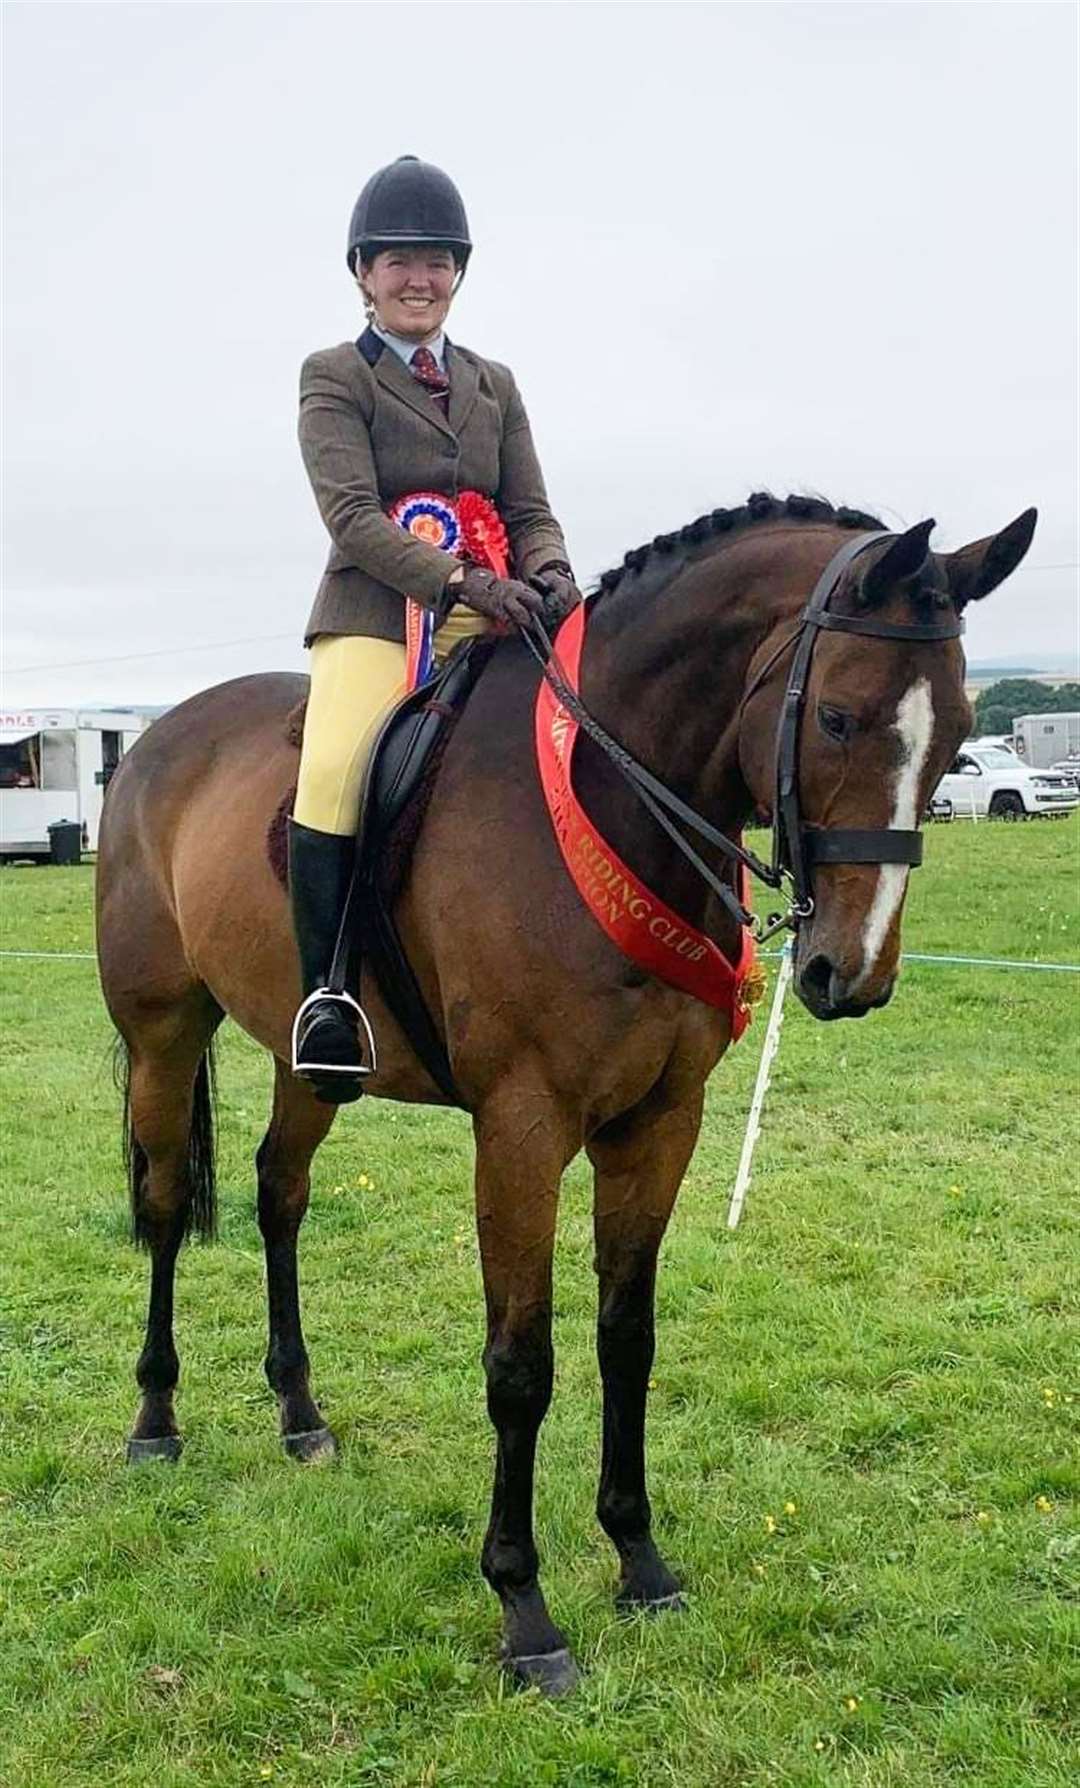 Ruth Sutherland and Mastermind IV, winners of the senior working hunter championship and reserve ridden horse title.